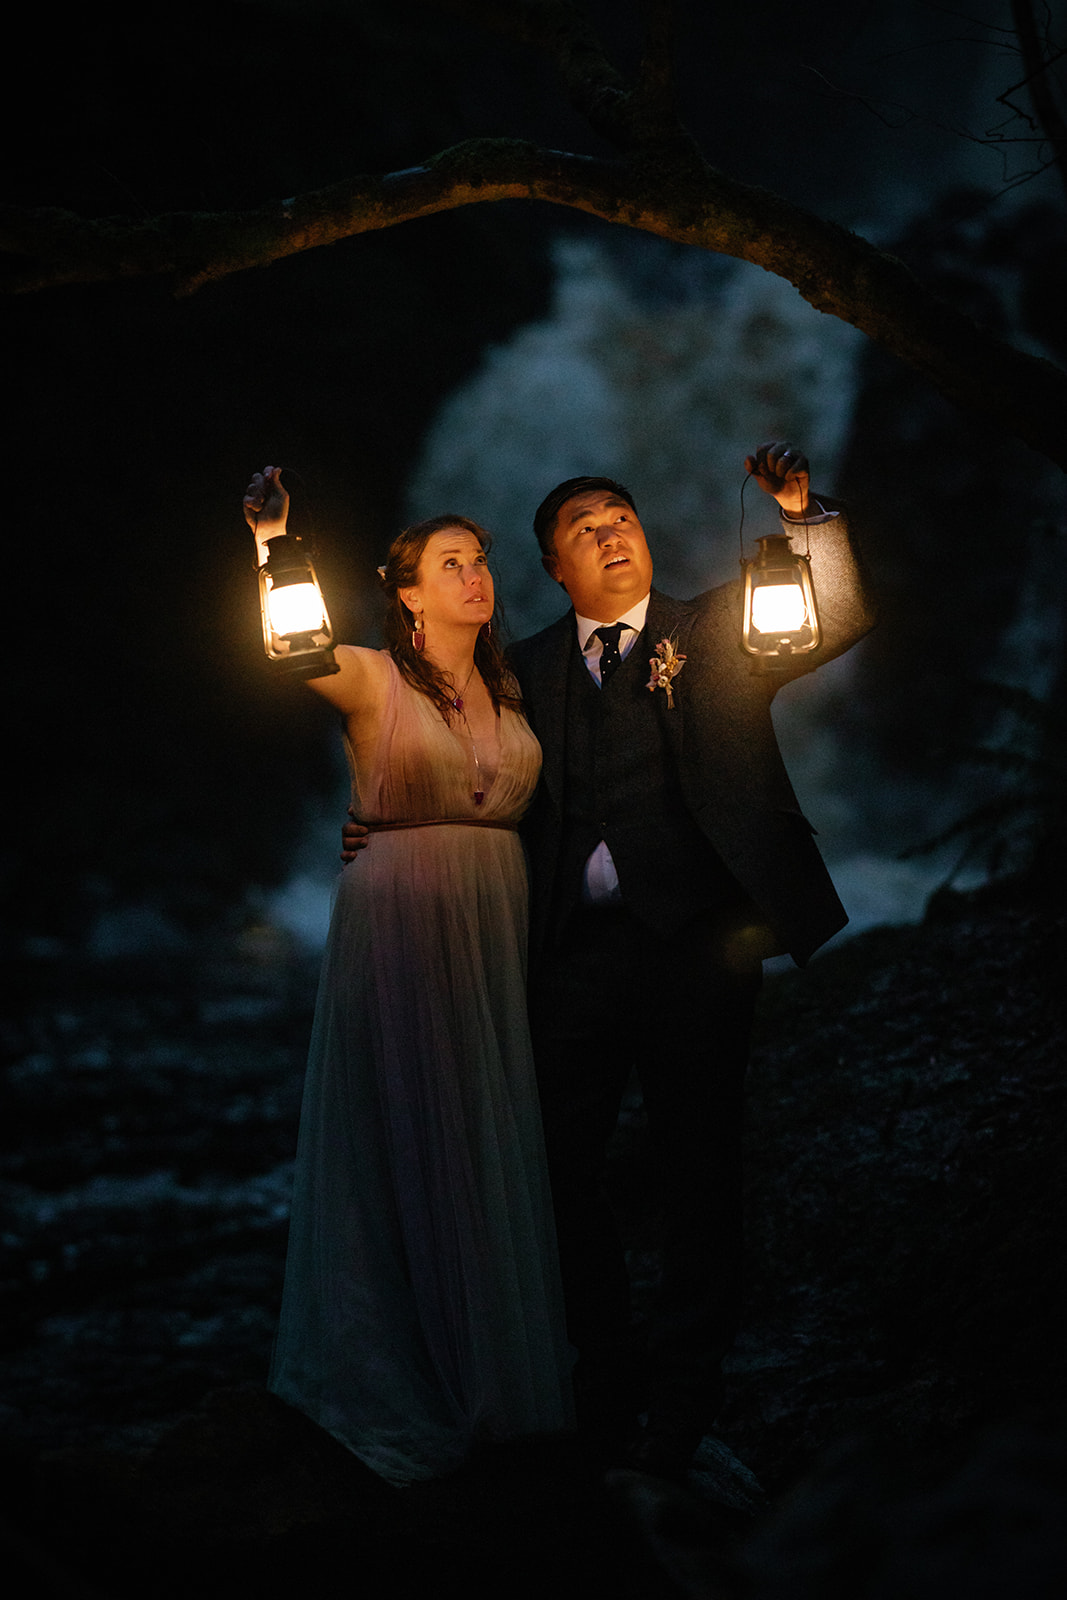 Mellie and Andrew pose for a photo with lanterns as their props for their Isle of Skye elopement photo shoot